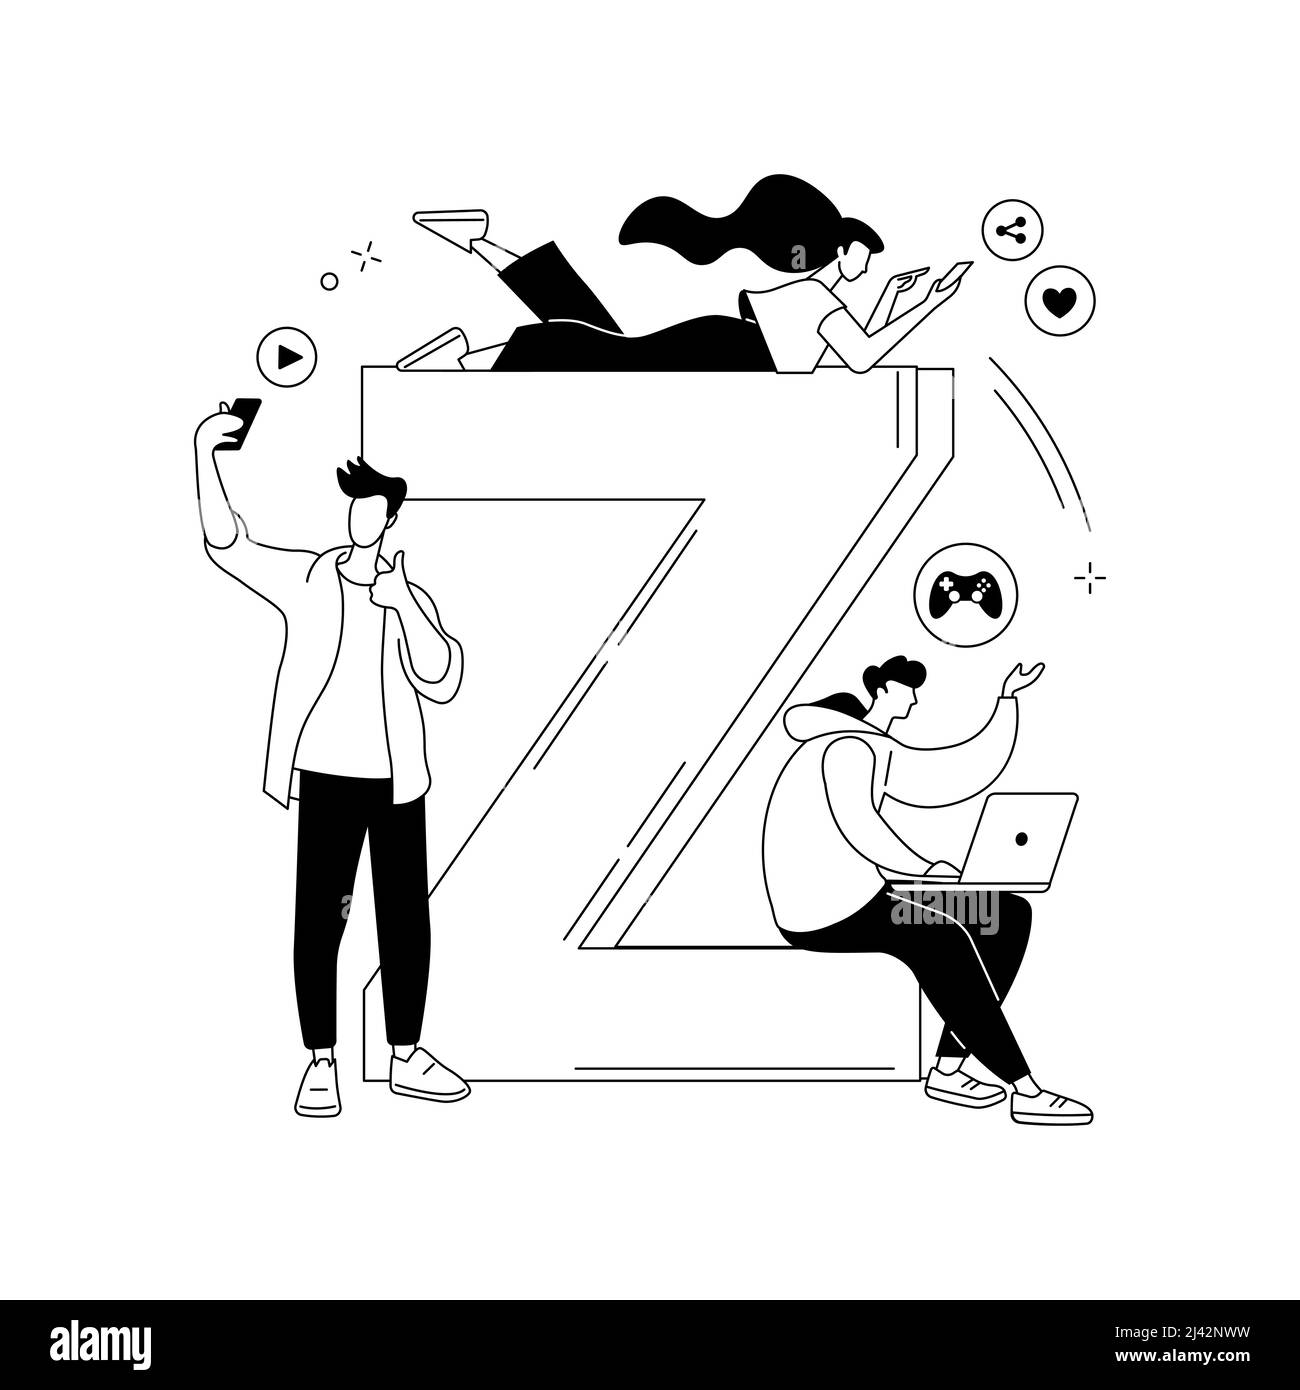 Generation Z abstract concept vector illustration. Hyper-connected world, childhood with tablet, mobile device, social media, mobile banking, personal Stock Vector